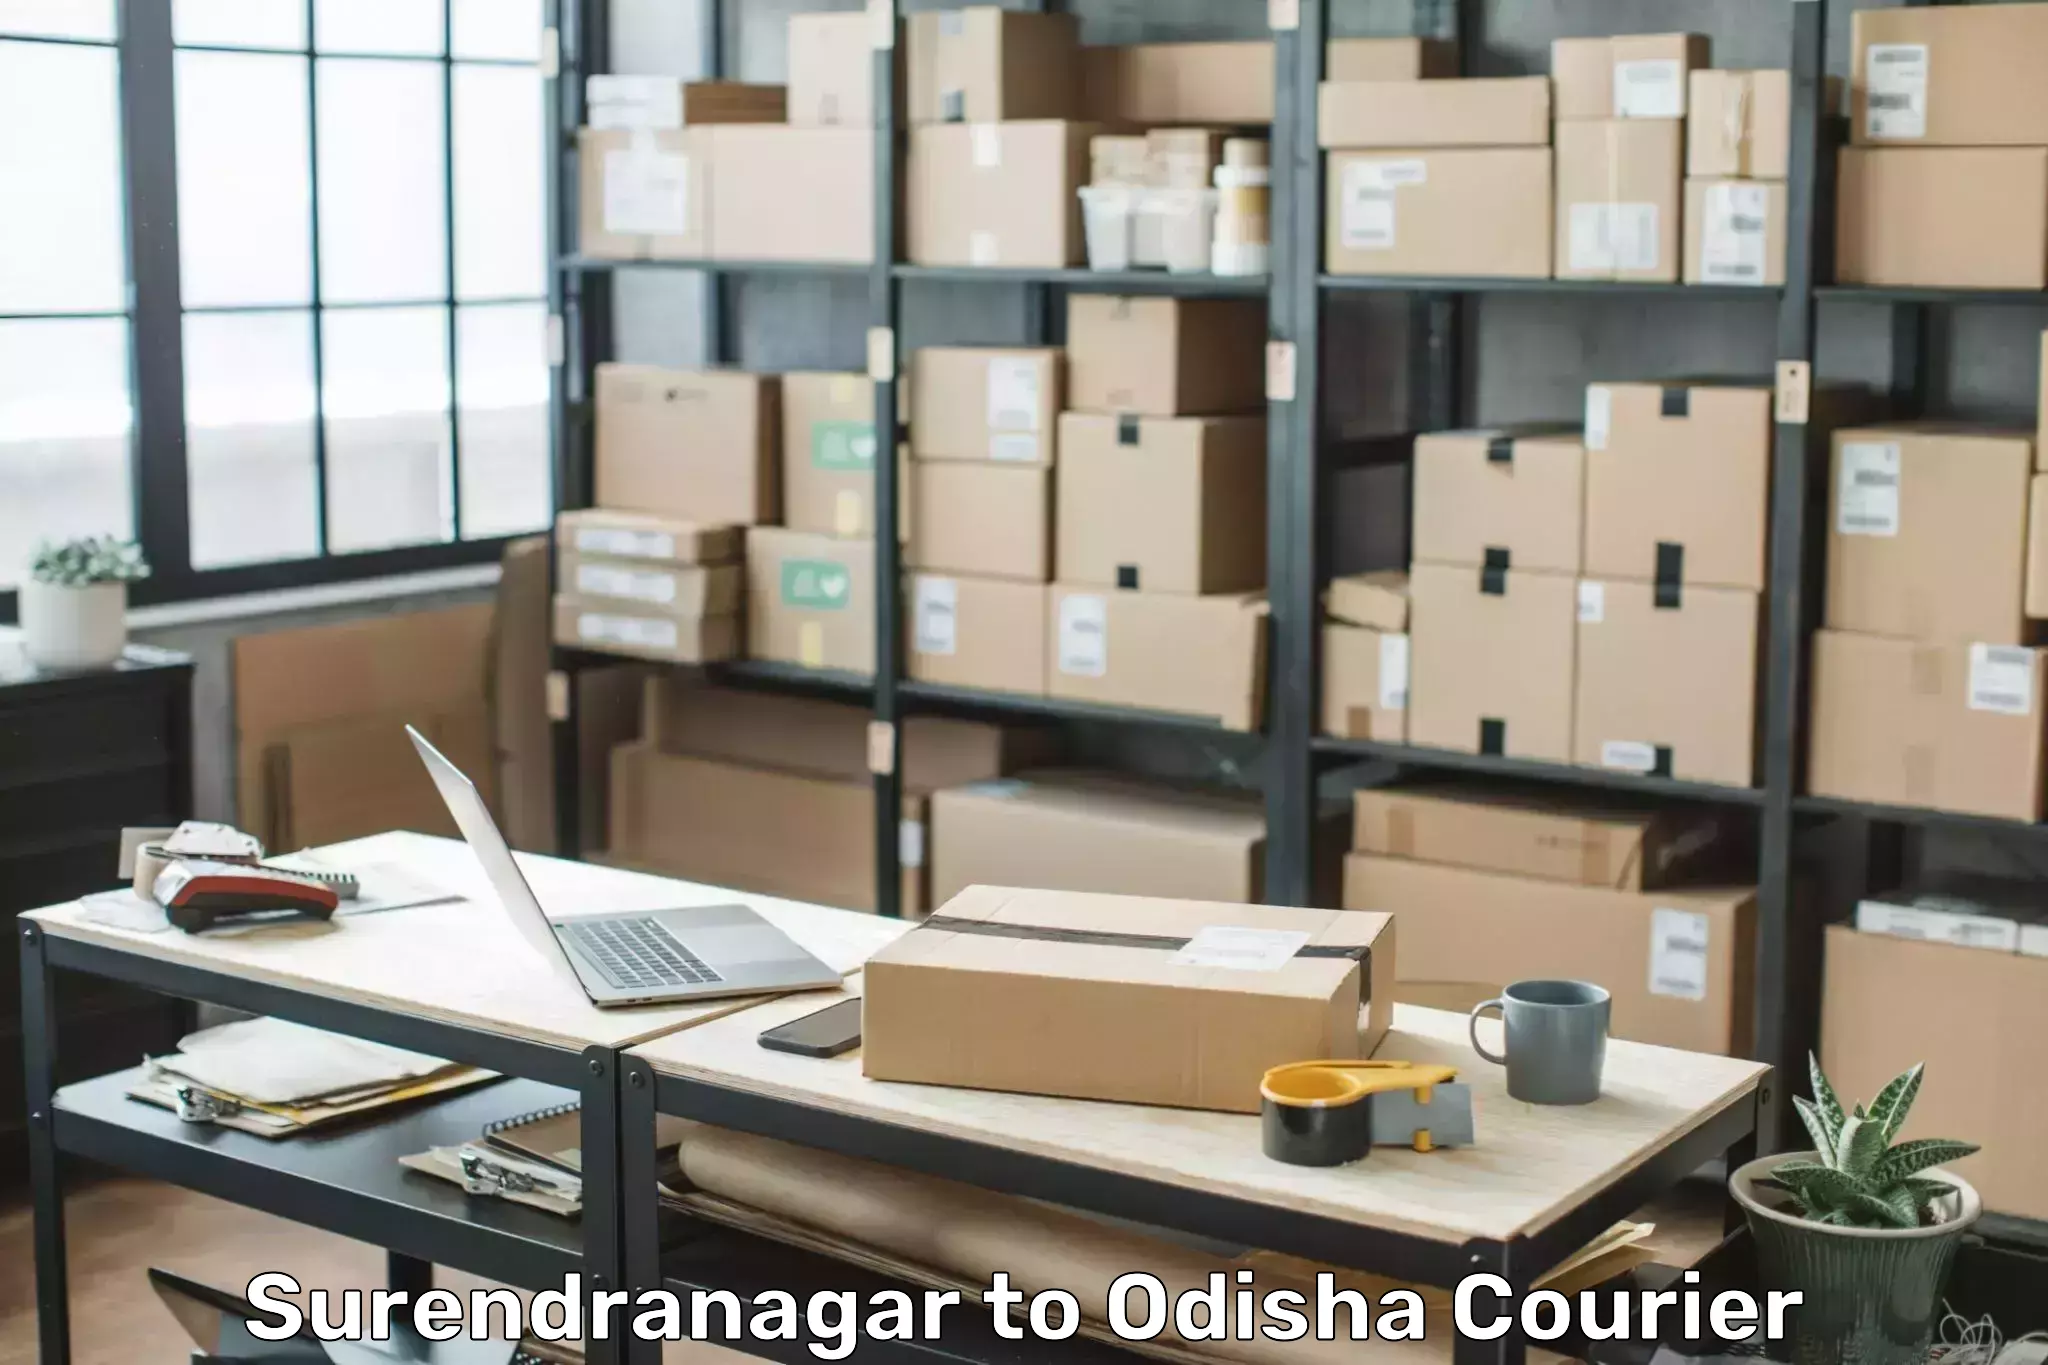 High-quality baggage shipment in Surendranagar to Mathili